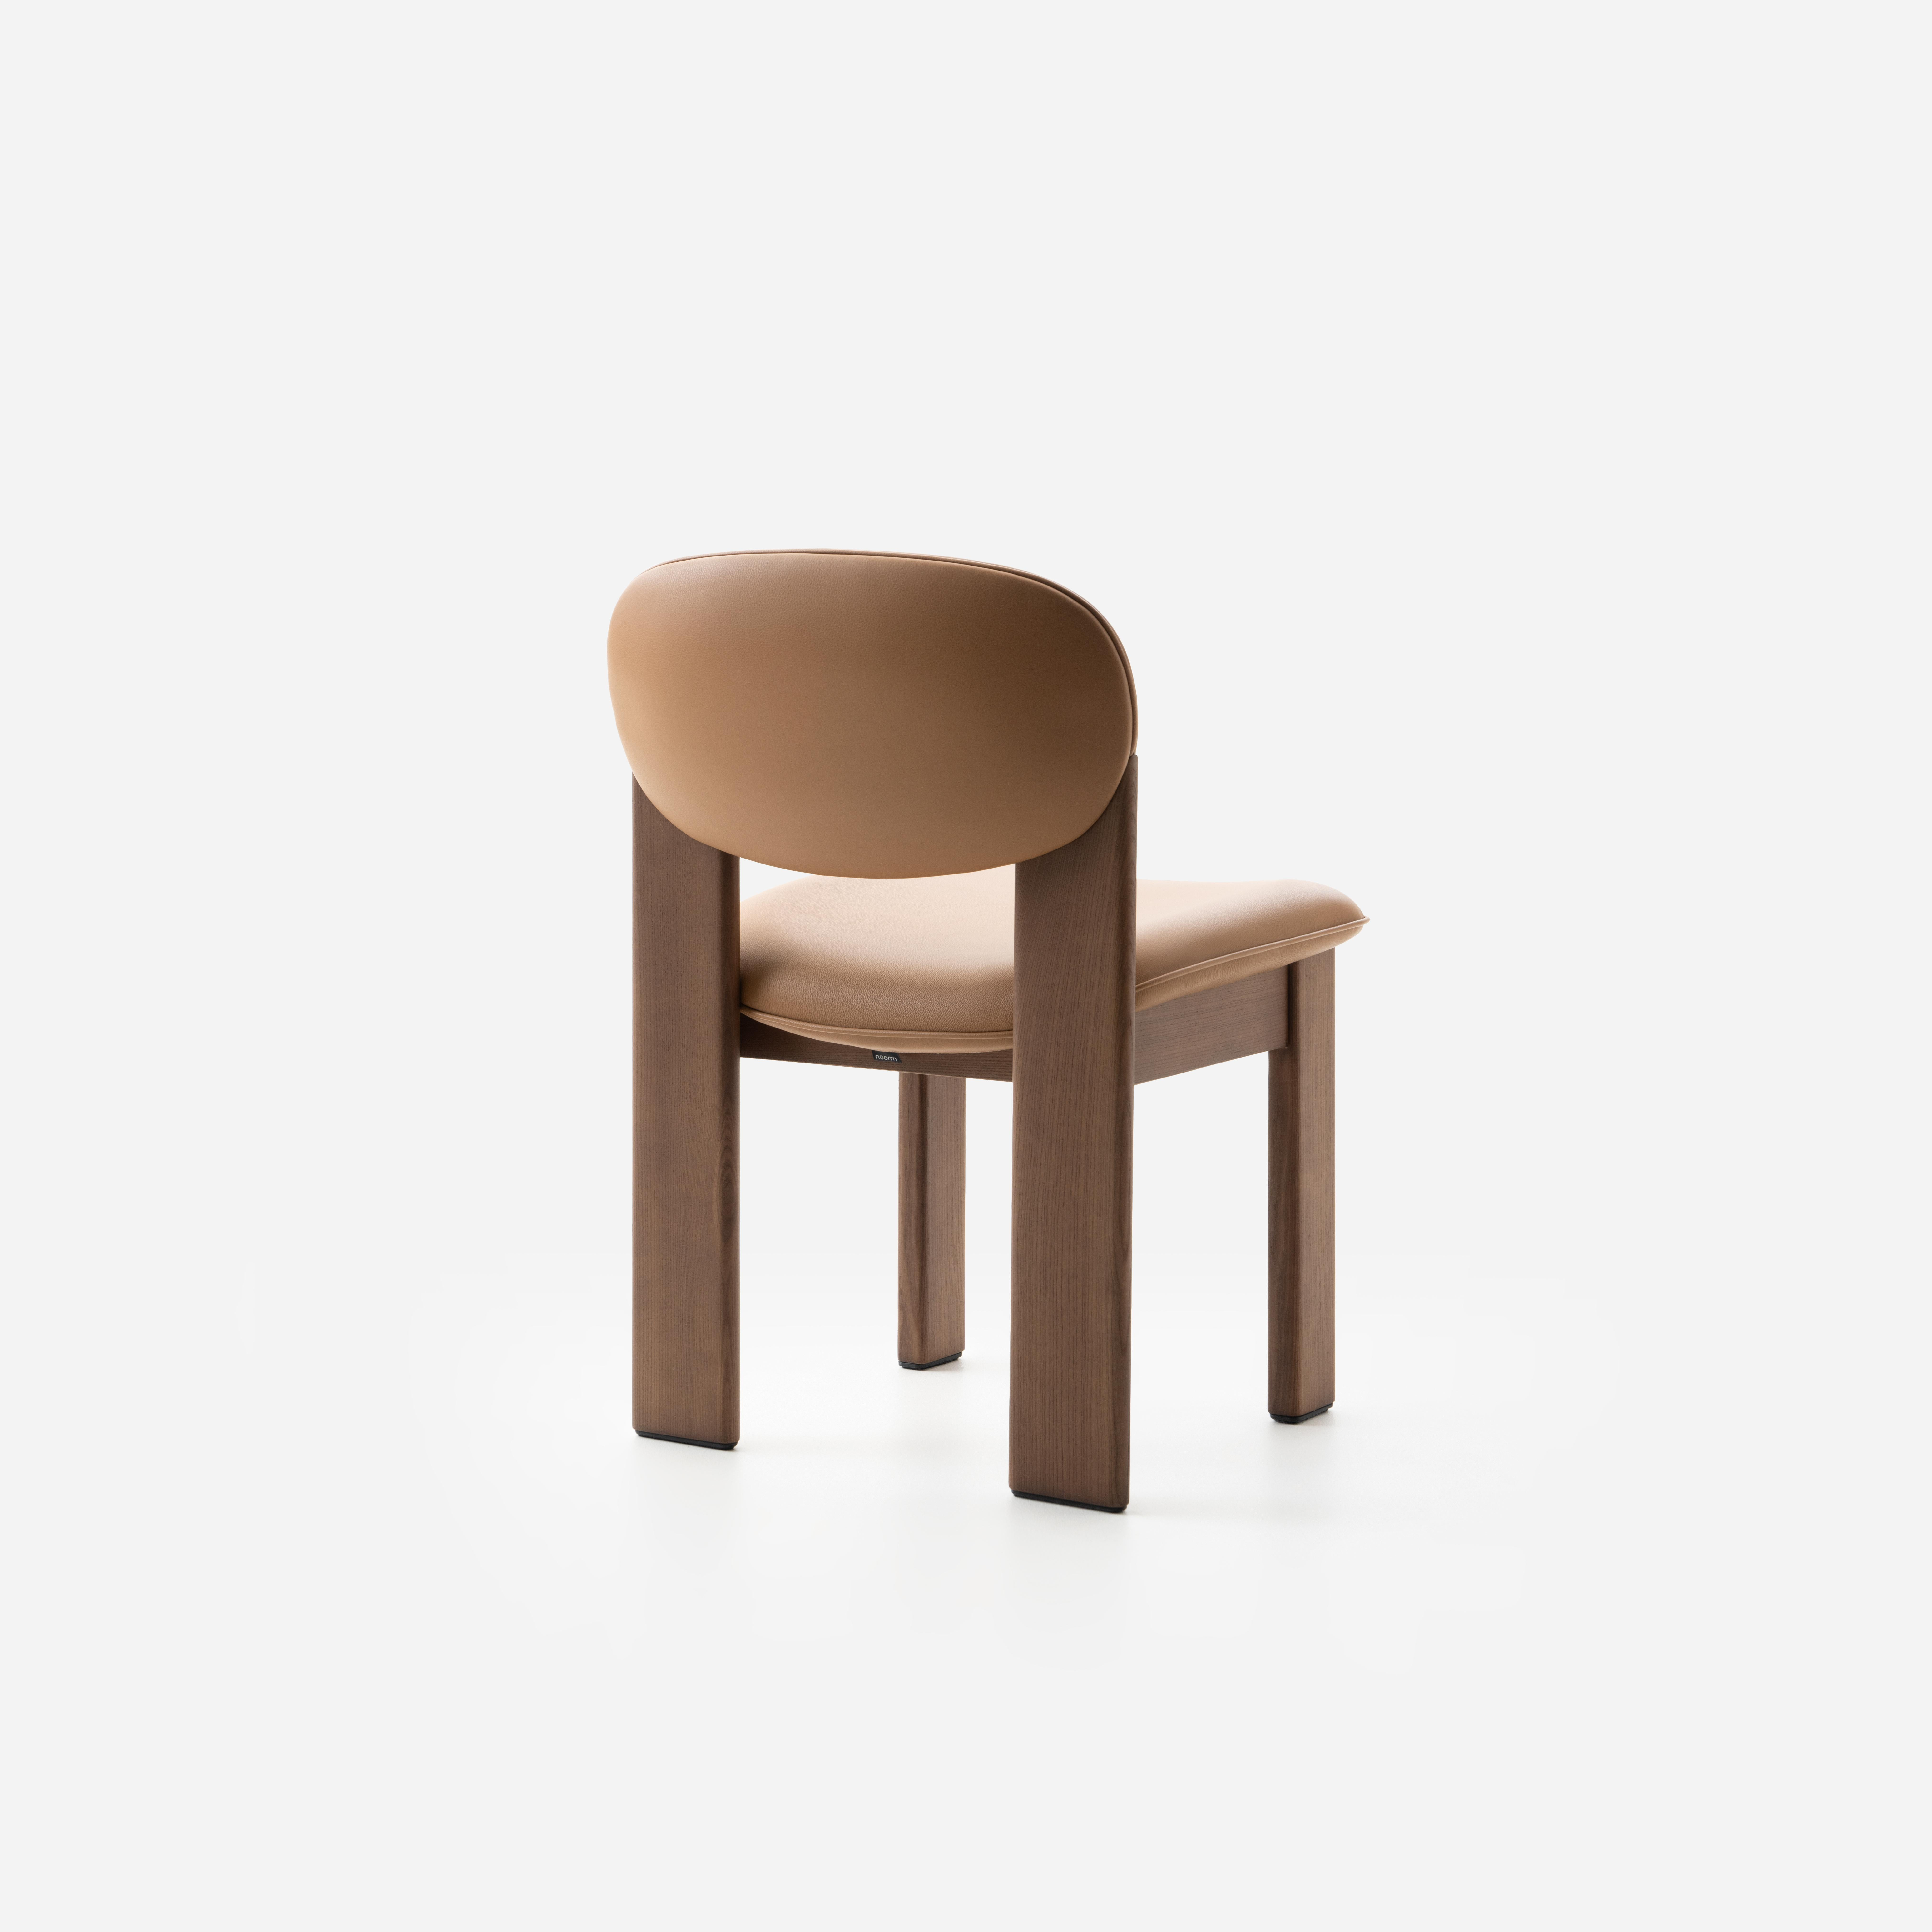 Metal Contemporary Dining Chair 'Archipen' by Noom, Leather Cashmere, Biscotto For Sale